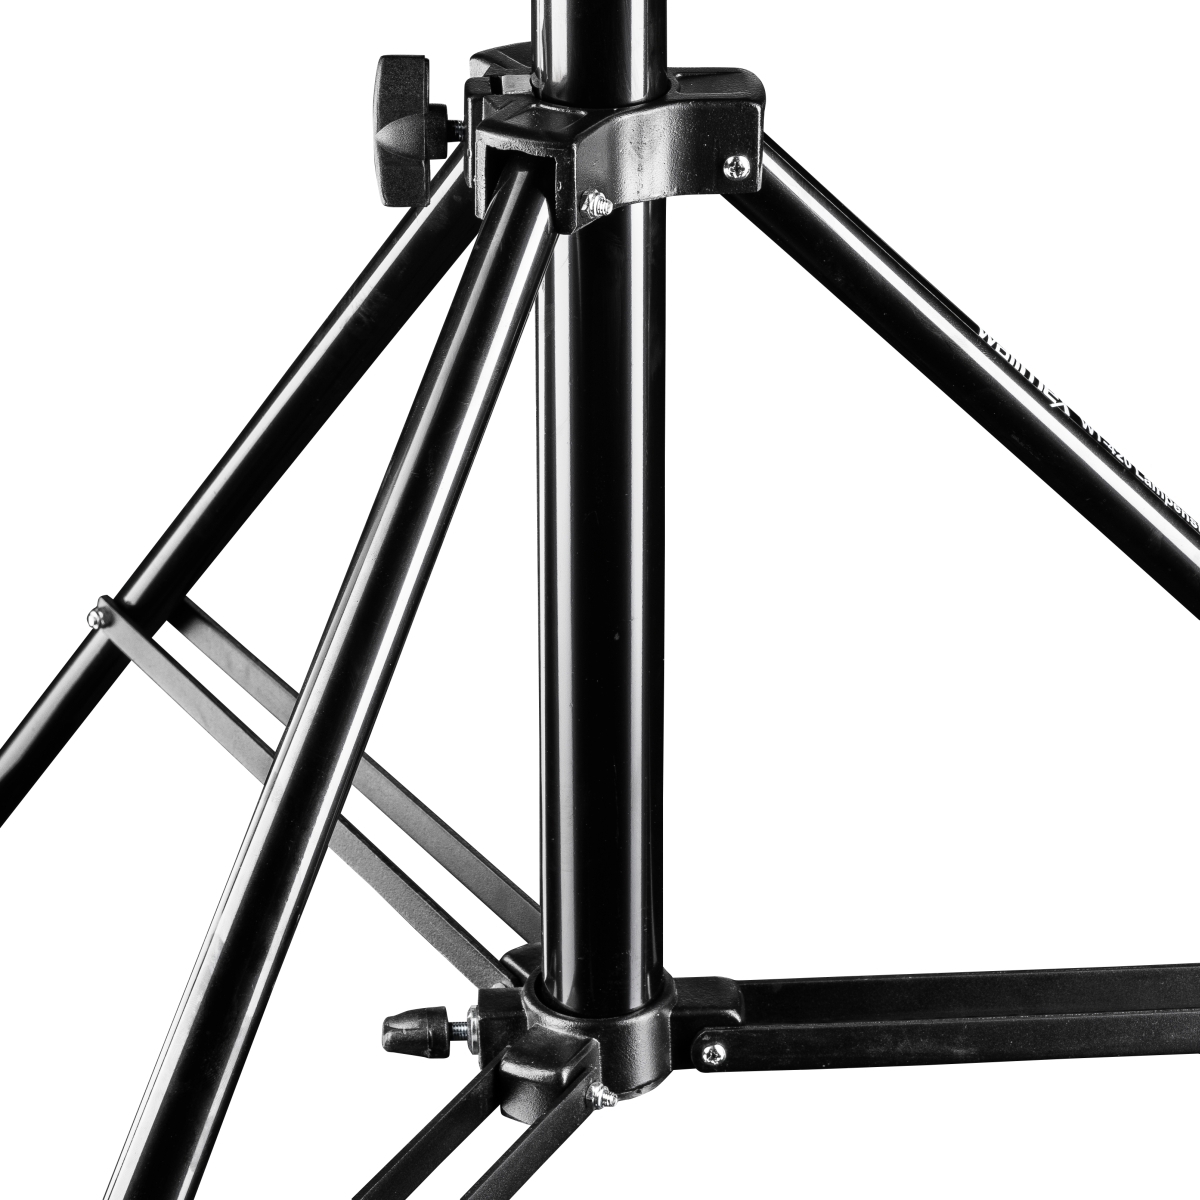 Walimex WT-420 Lamp Stand, 420cm